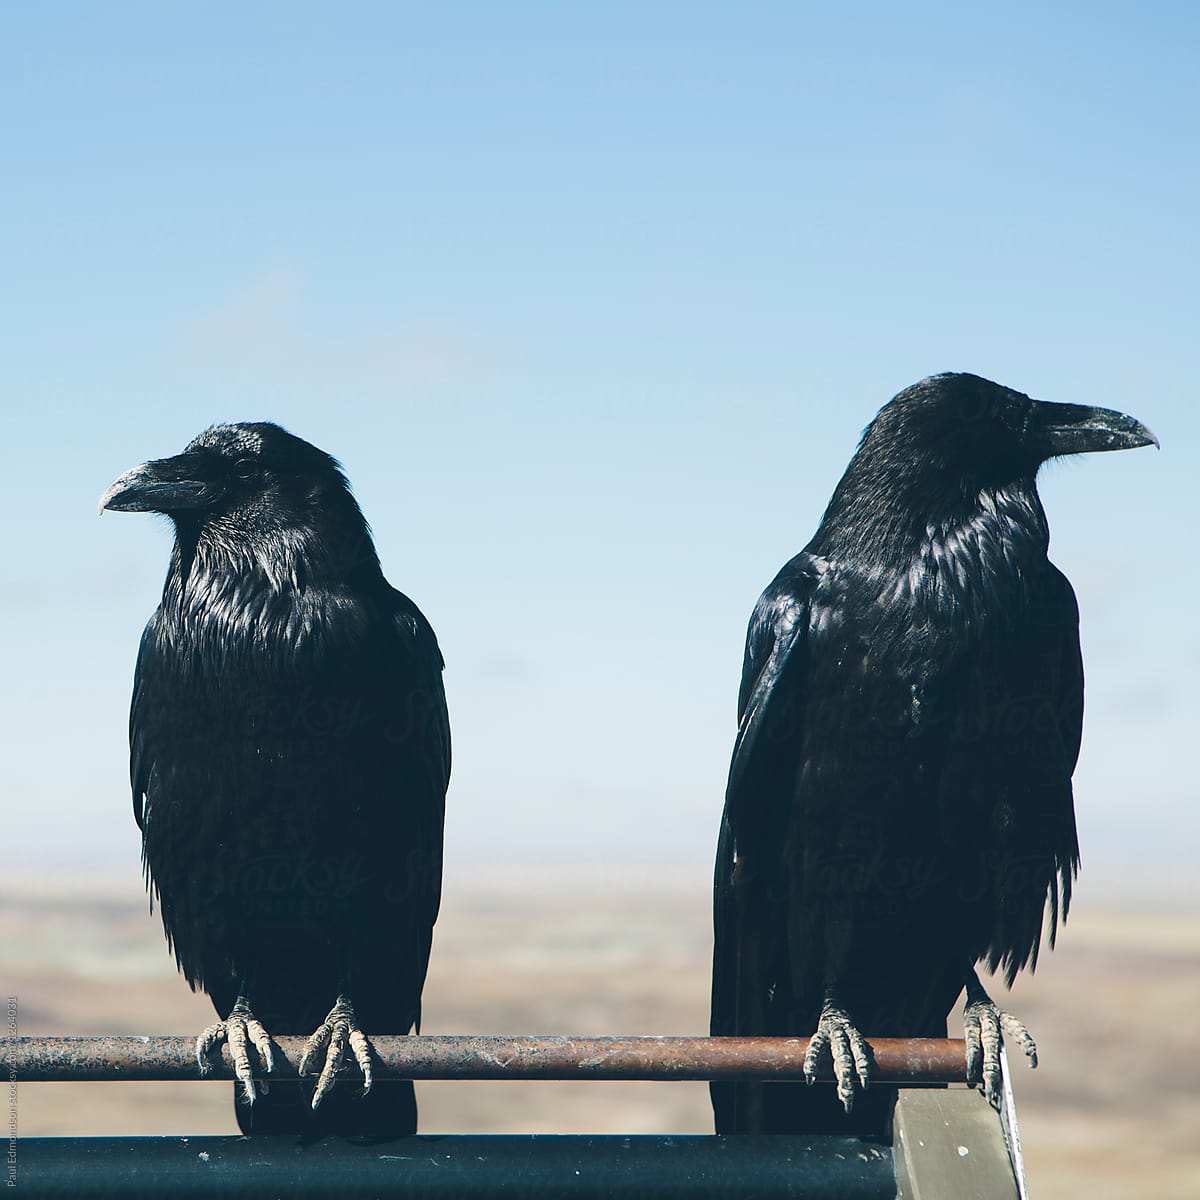 Two ravens sitting side by side on metal beam